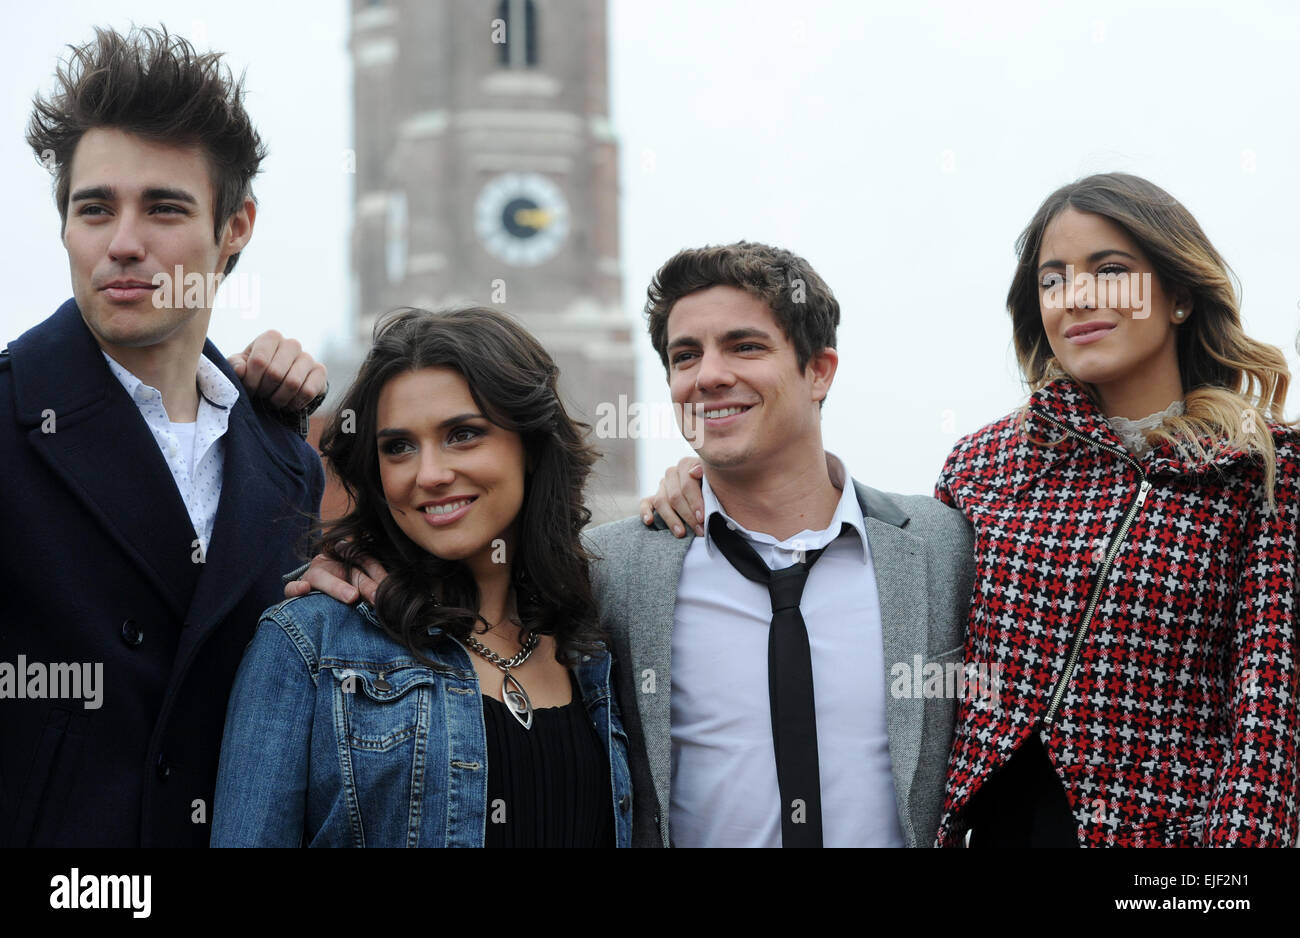 Munich, Germany. 25th Mar, 2015. Actors Jorge Blanco (L-R) (Mexico, as Leon), Alba Rico (Spain, as Naty), Ruggero Pasquarelli (Italy, as Frederico) and Martina Stoessel (Argentina, as Violetta) pose during a press event on the roof of a hotel in Munich, Germany, 25 March 2015. The actors are promoting the new Disney TV show 'Violetta' in Germany. PHOTO: TOBIAS HASE/dpa/Alamy Live News Stock Photo